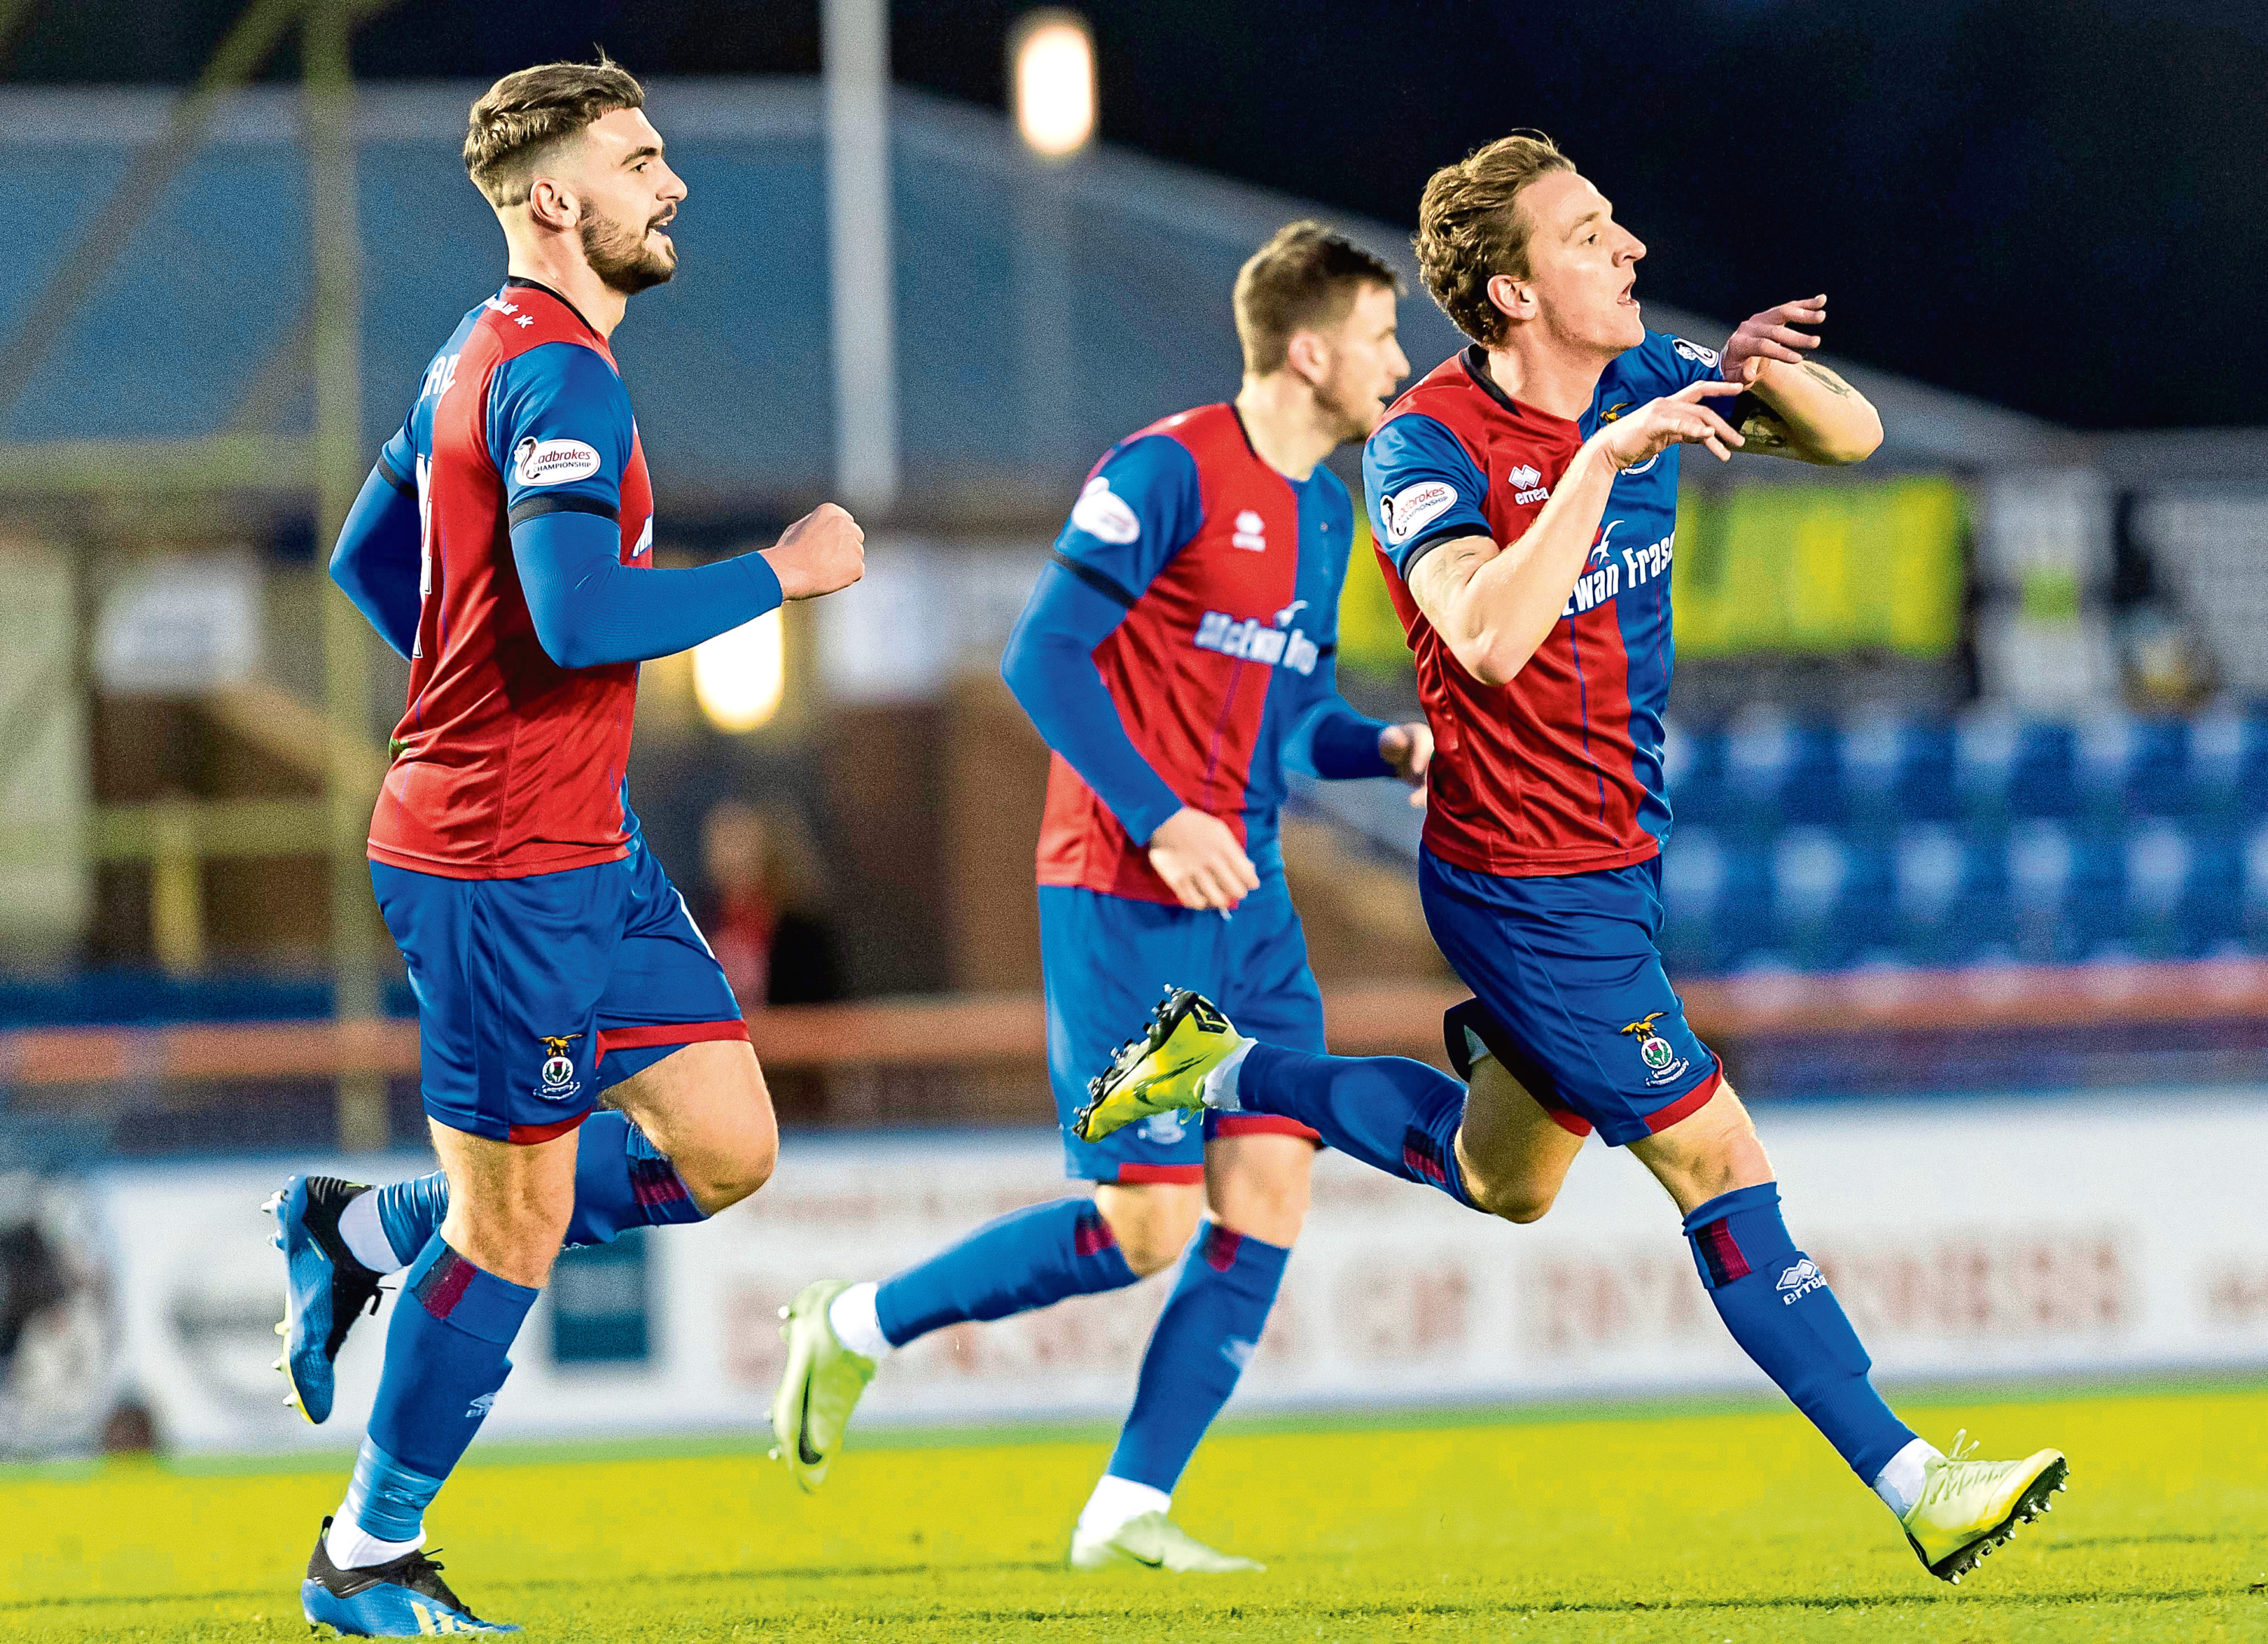 Tom Walsh (right) celebrates his goal for Inverness to make it 1-0